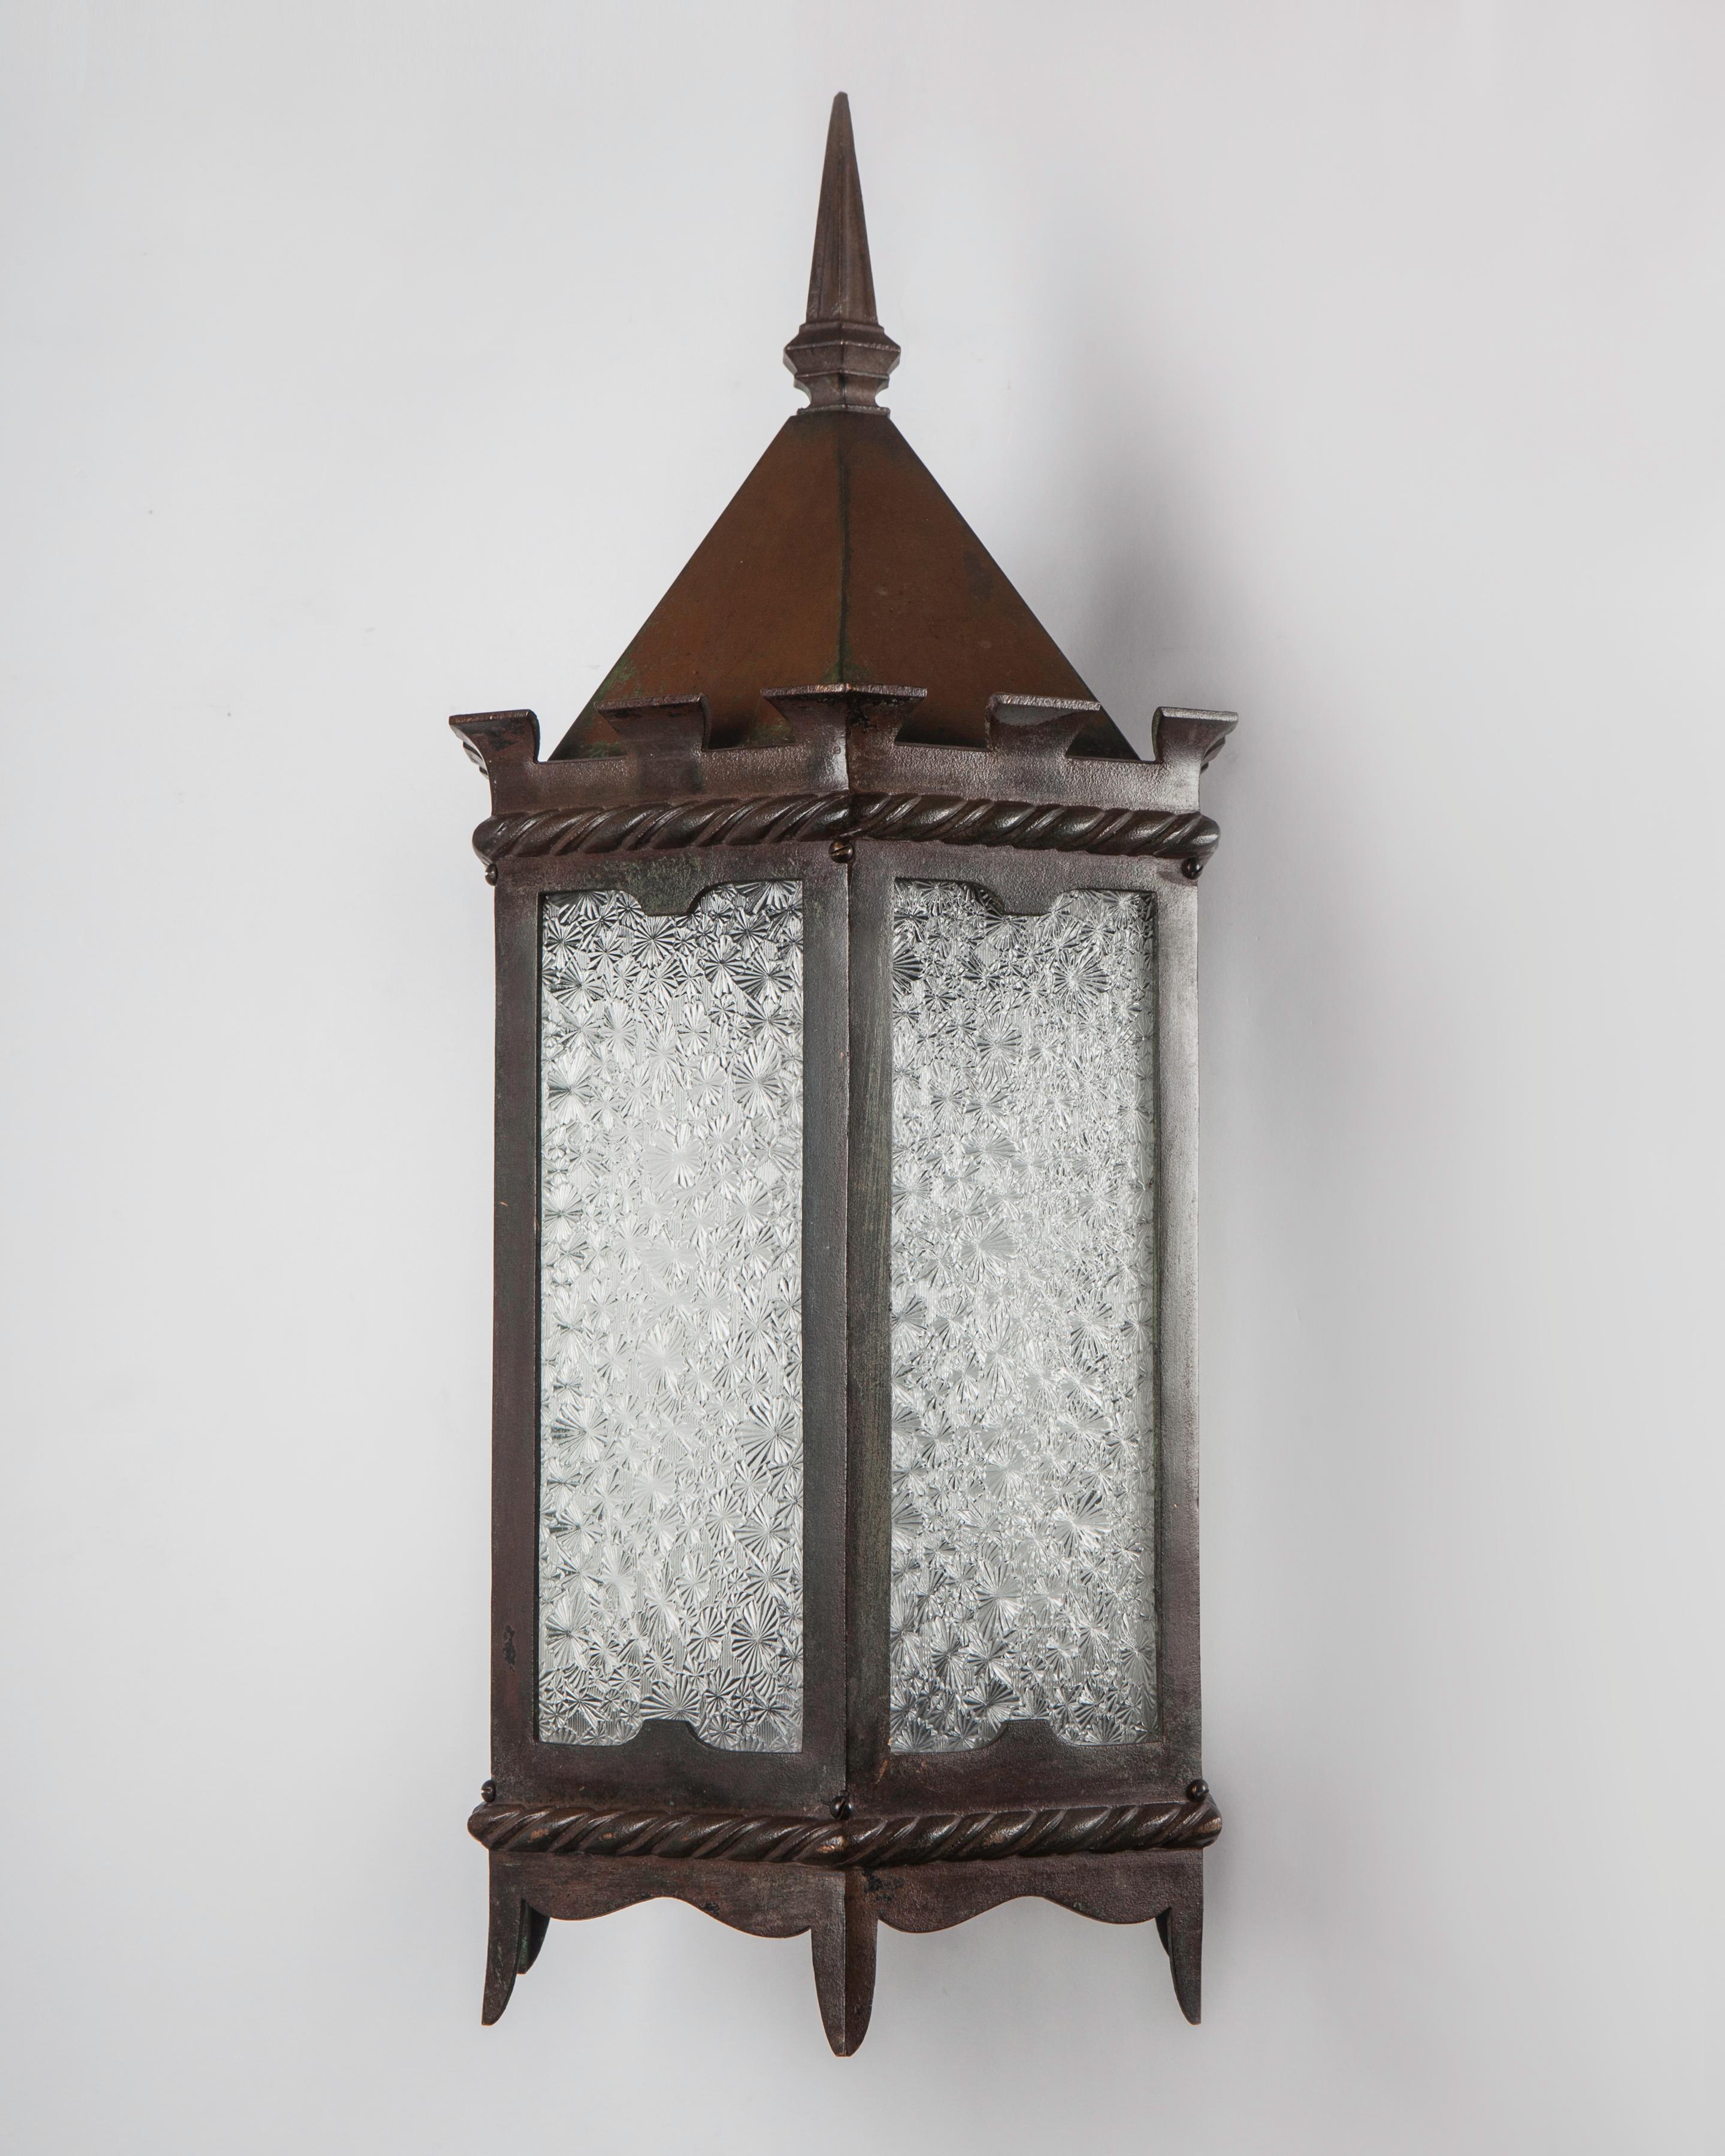 AEX0599
Circa 1920
A pair of vintage bronze exterior wall lanterns with hexagonal bodies glazed with frosted, textured glass. The twin backplates in the form of leafy quatrefoils. In their original age-worn mottled finish, the red hue including